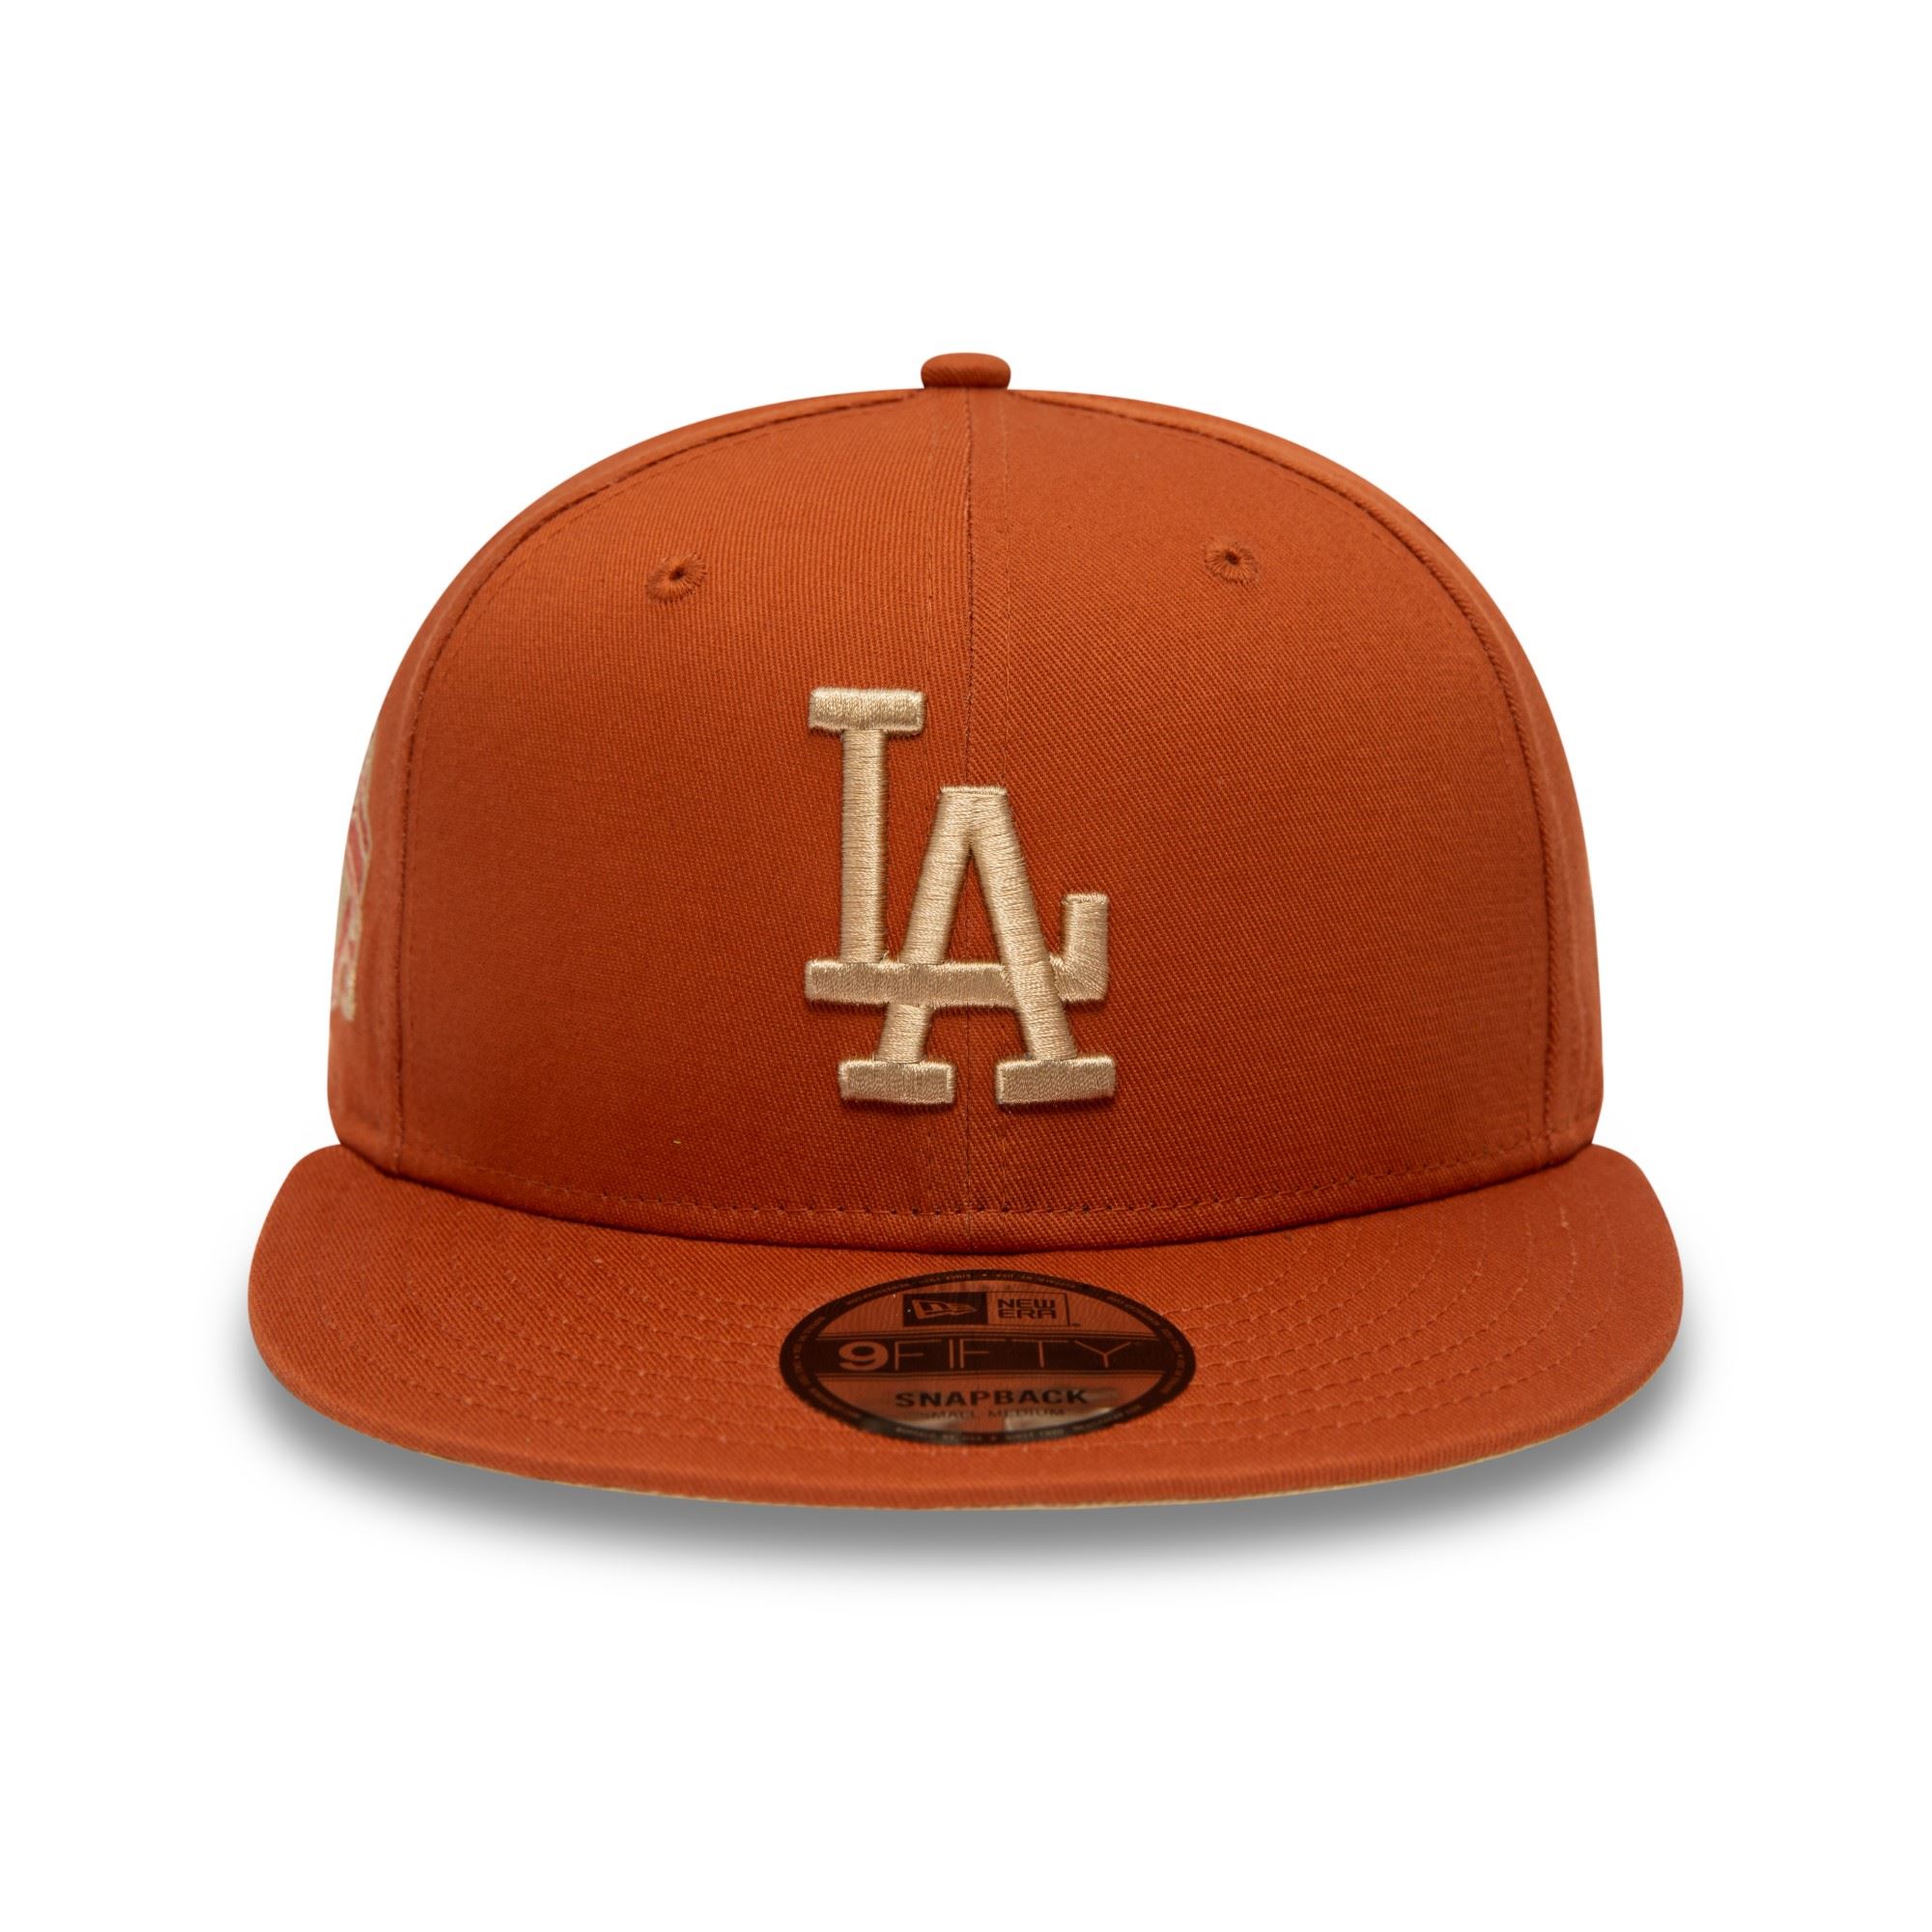 Los Angeles Dodgers MLB Side Patch Brown 9Fifty Snaback Cap New Era